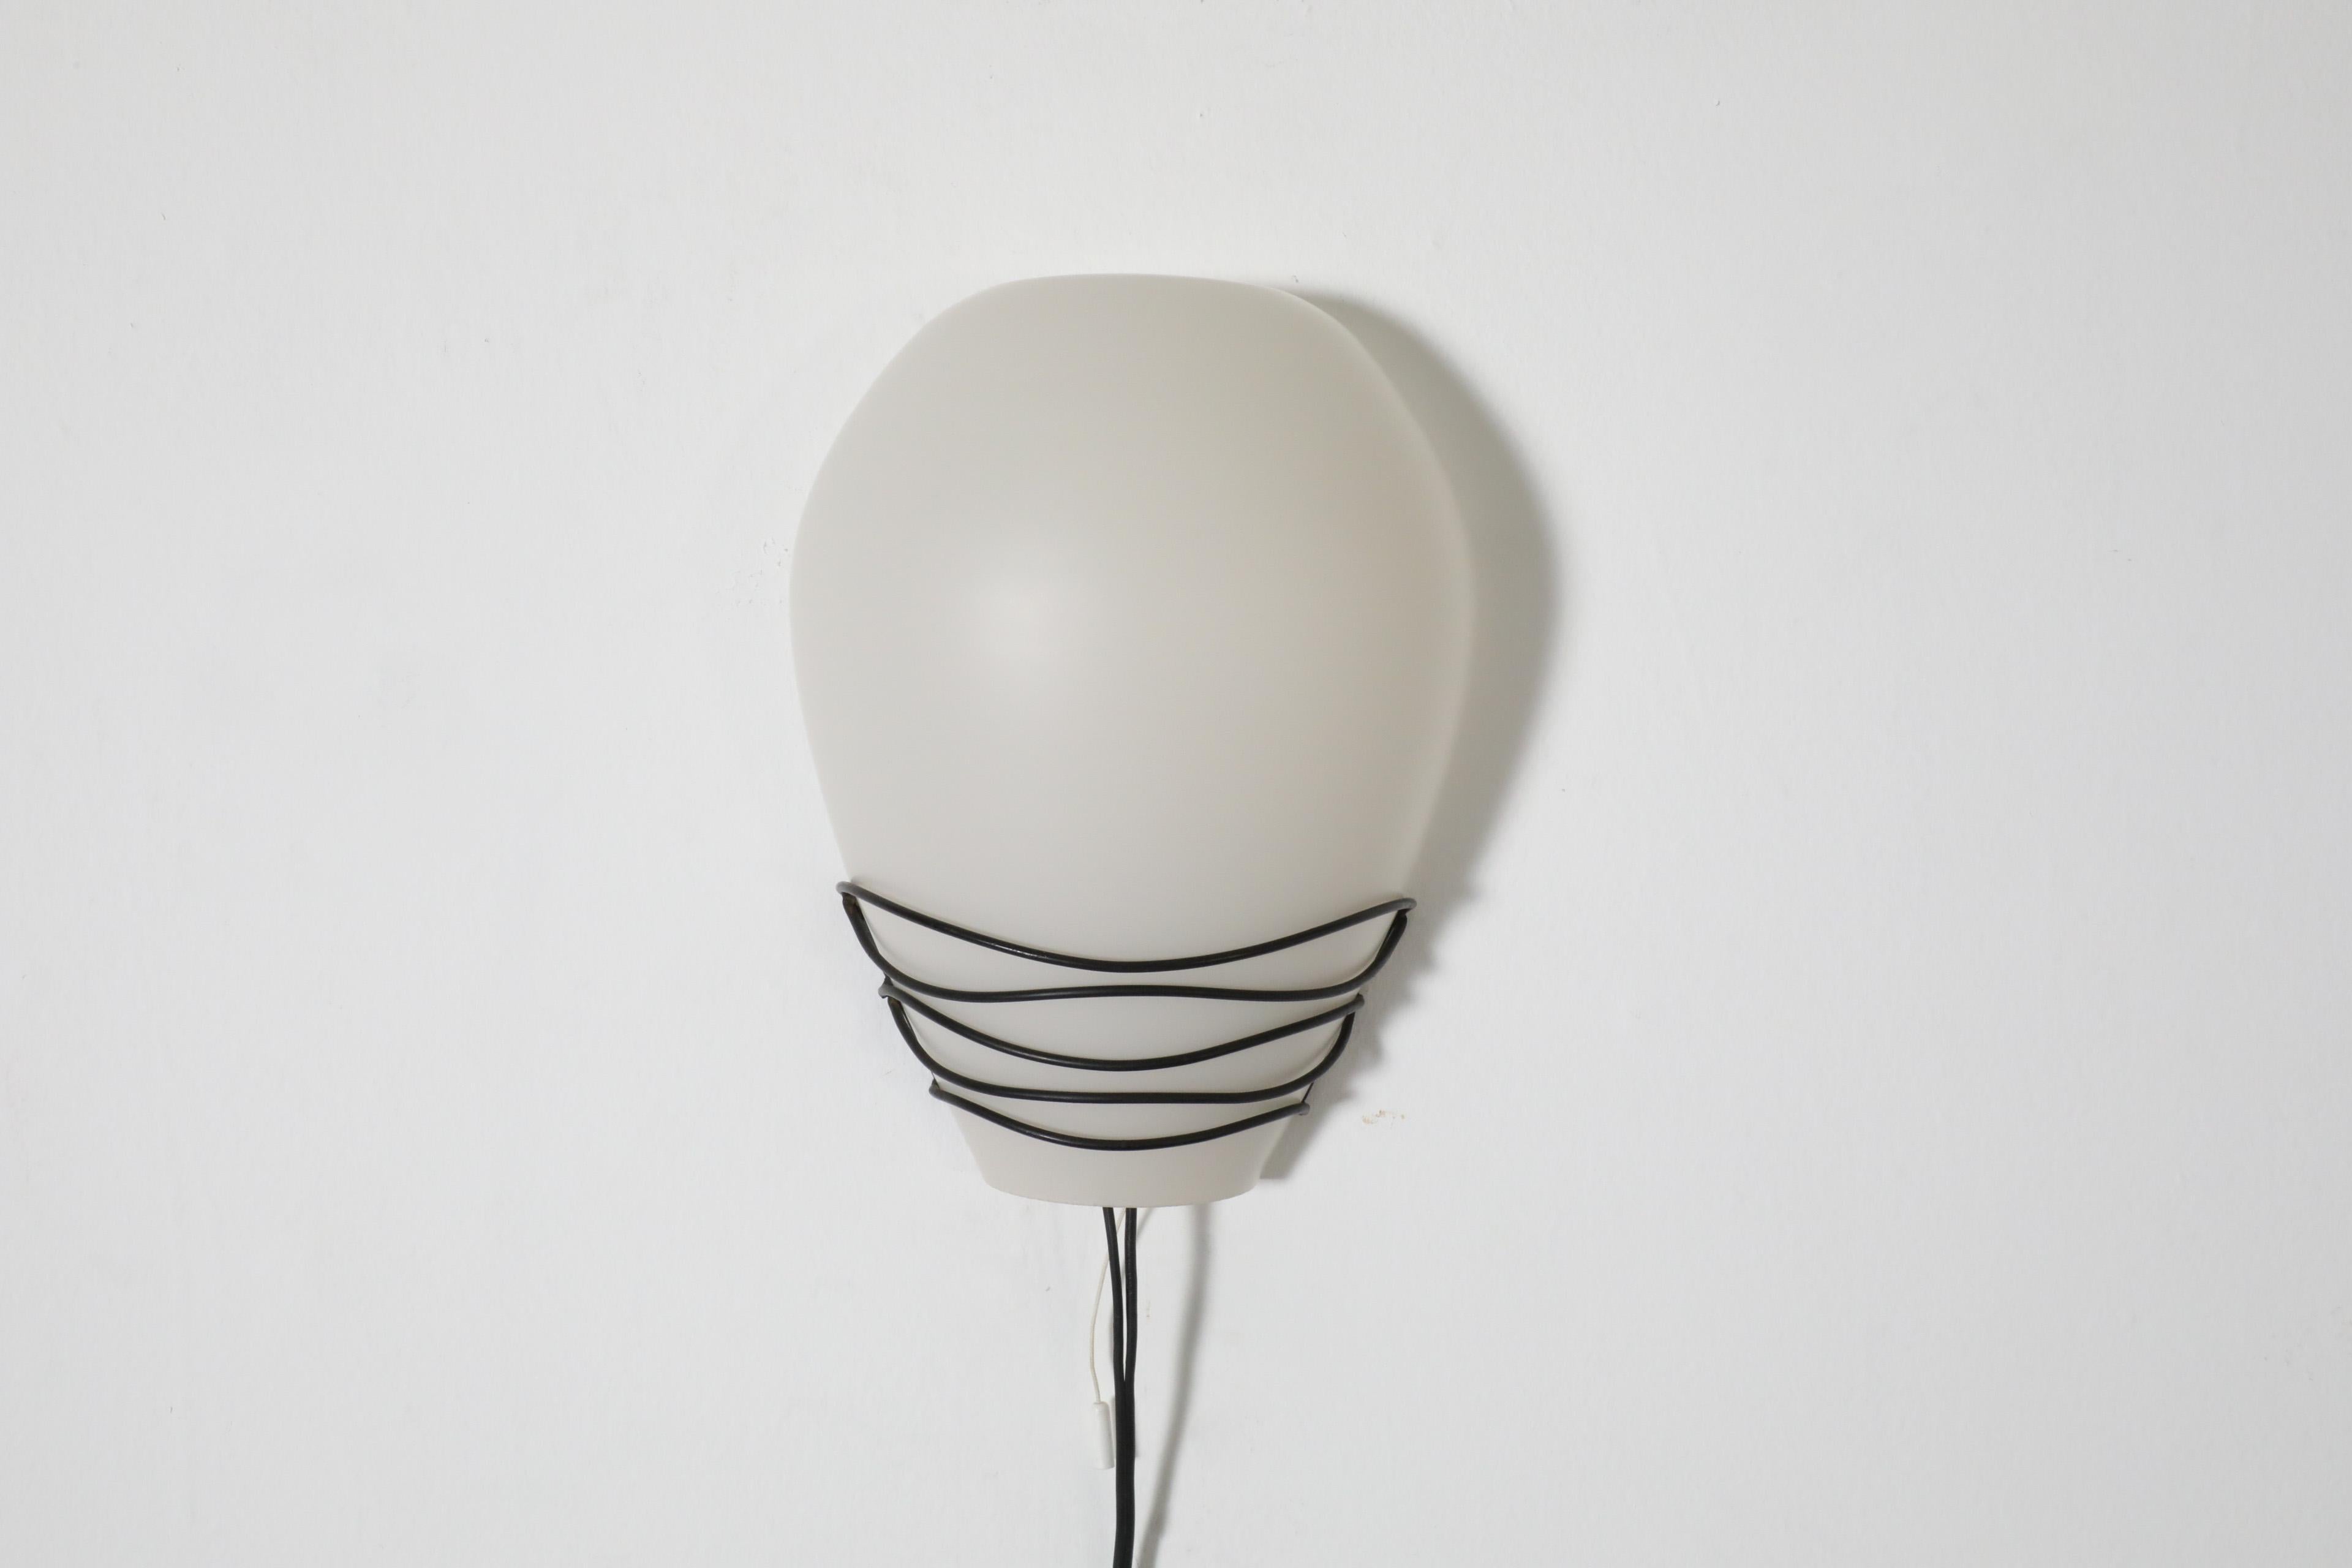 Philips Milk Glass Wall Sconce w/ Black Wire Mount and Milk Glass Shade, 1950's For Sale 6